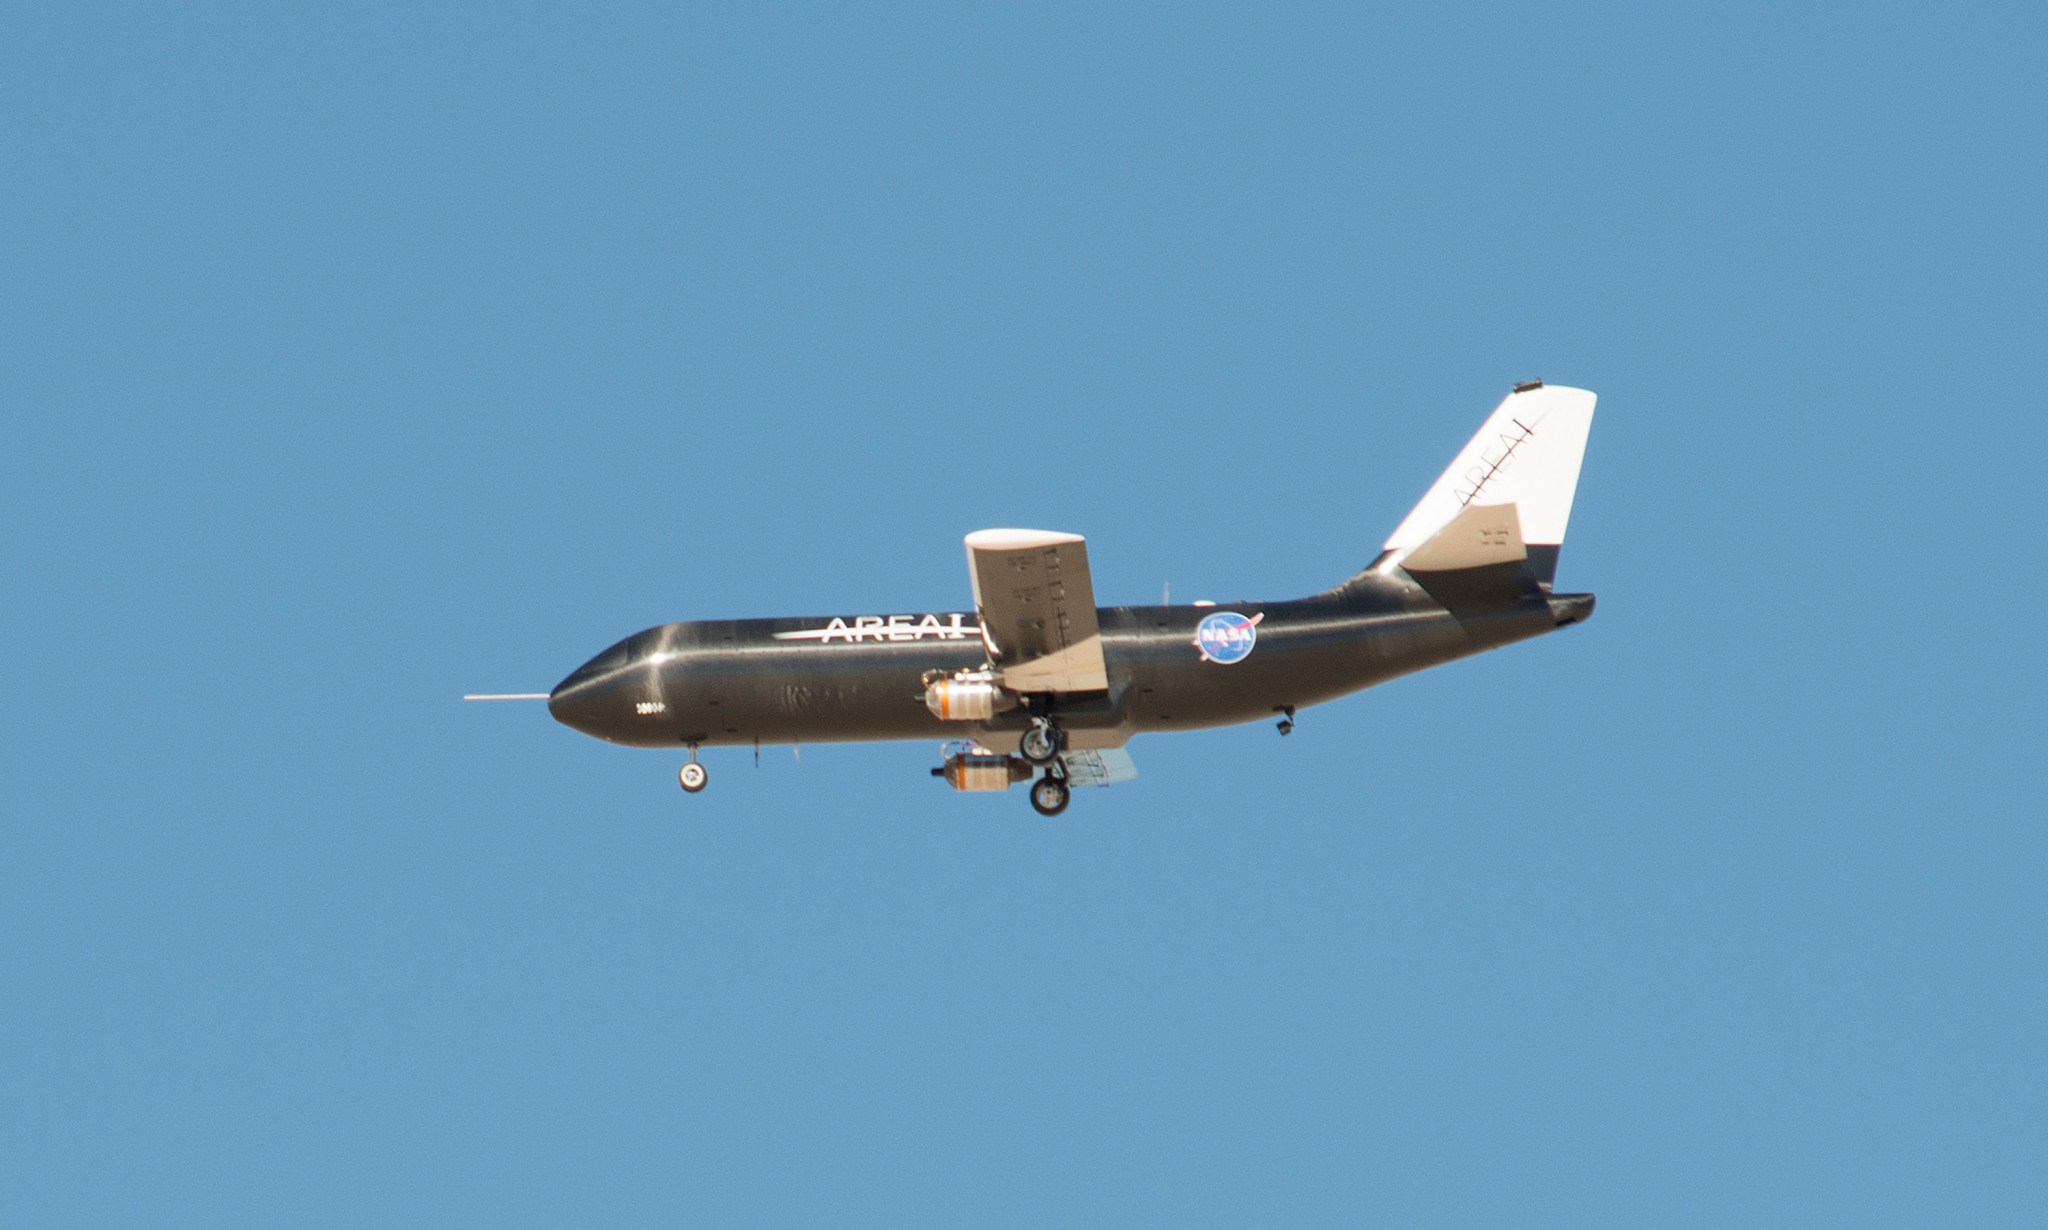 The remotely-piloted Prototype-Technology Evaluation and Research Aircraft, or PTERA, made its first flight on October 22, 2015.